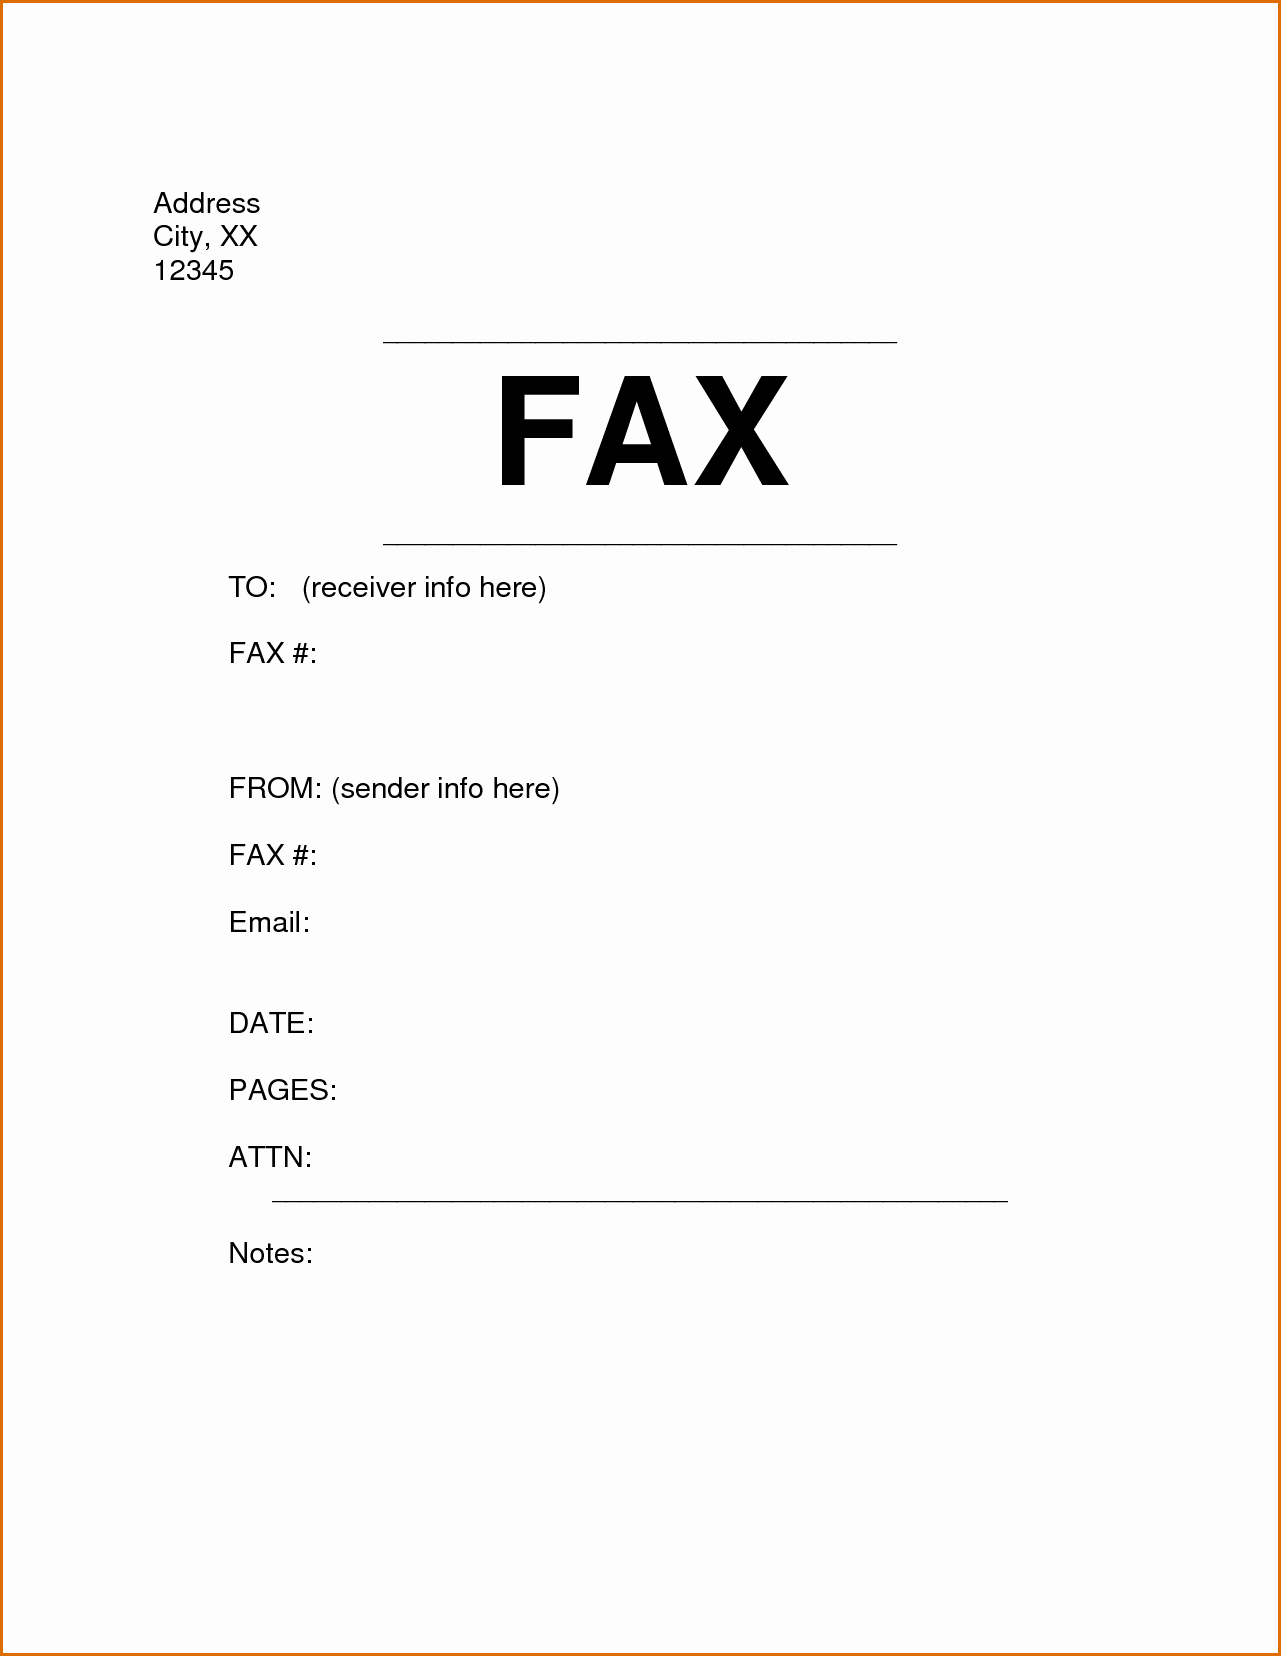 Cover Sheet for A Fax Best Of 6 Fax Cover Sheet format